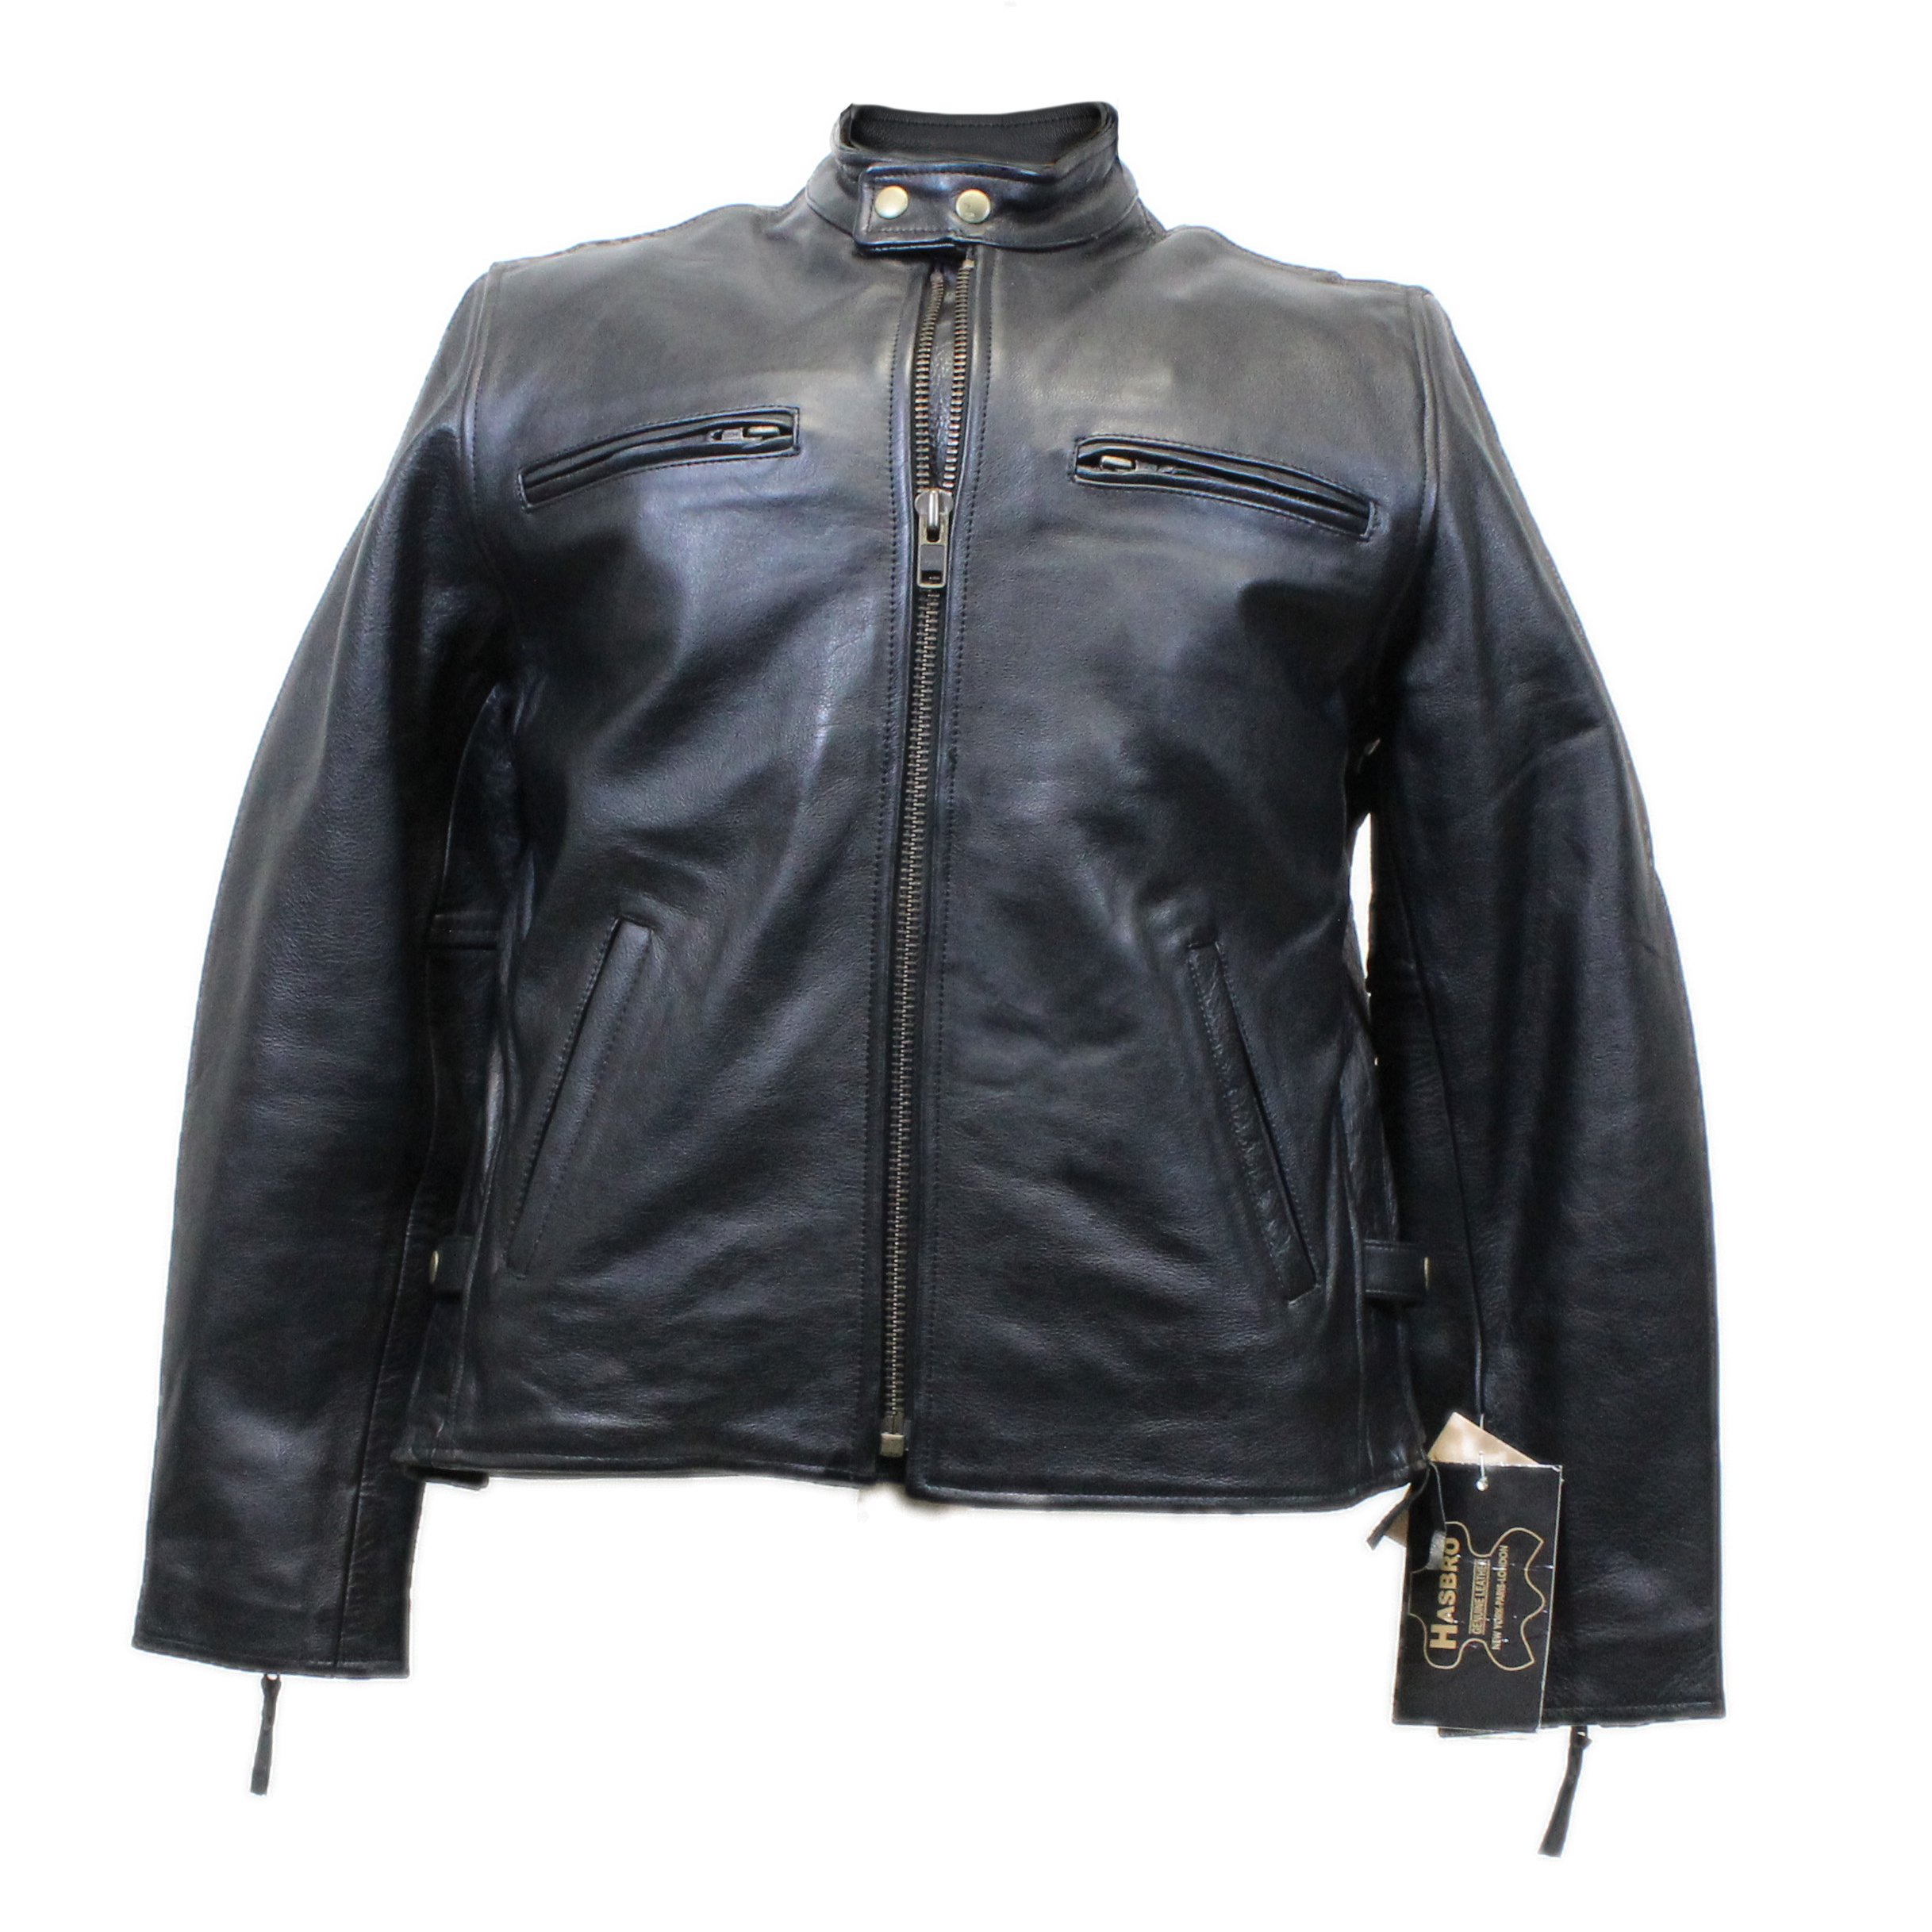 Motorcycle Leather Jacket Hasbro Leather Top Quality